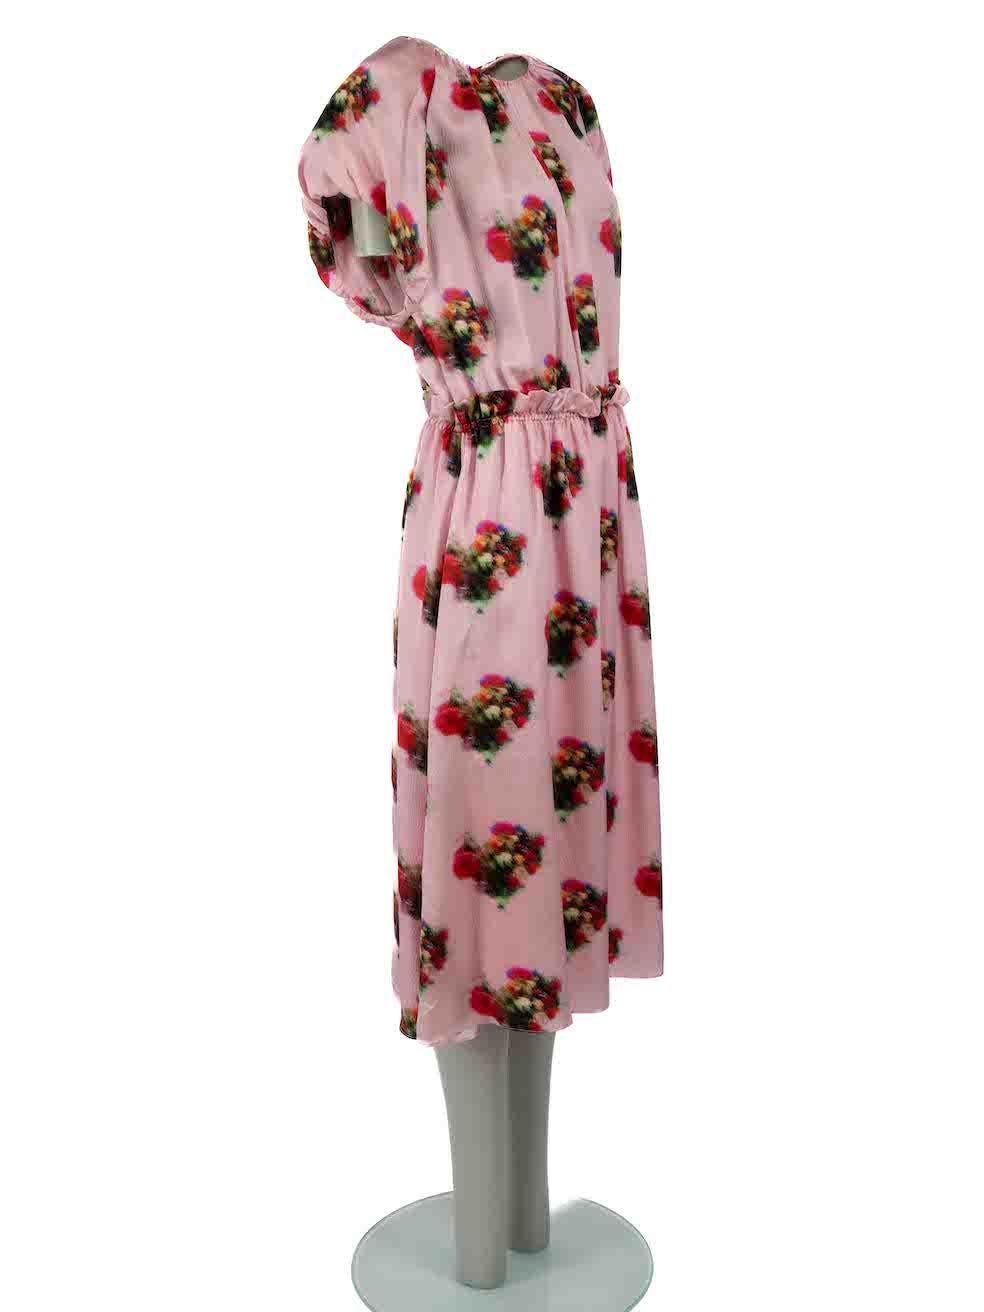 CONDITION is Very good. Hardly any visible wear to dress is evident on this used Adam Lippes designer resale item.
 
Details
Pink
Silk
Knee length dress
Round neckline
Motif pattern
Elasticated waistband
Back hook and eye closure
 
Made in USA
